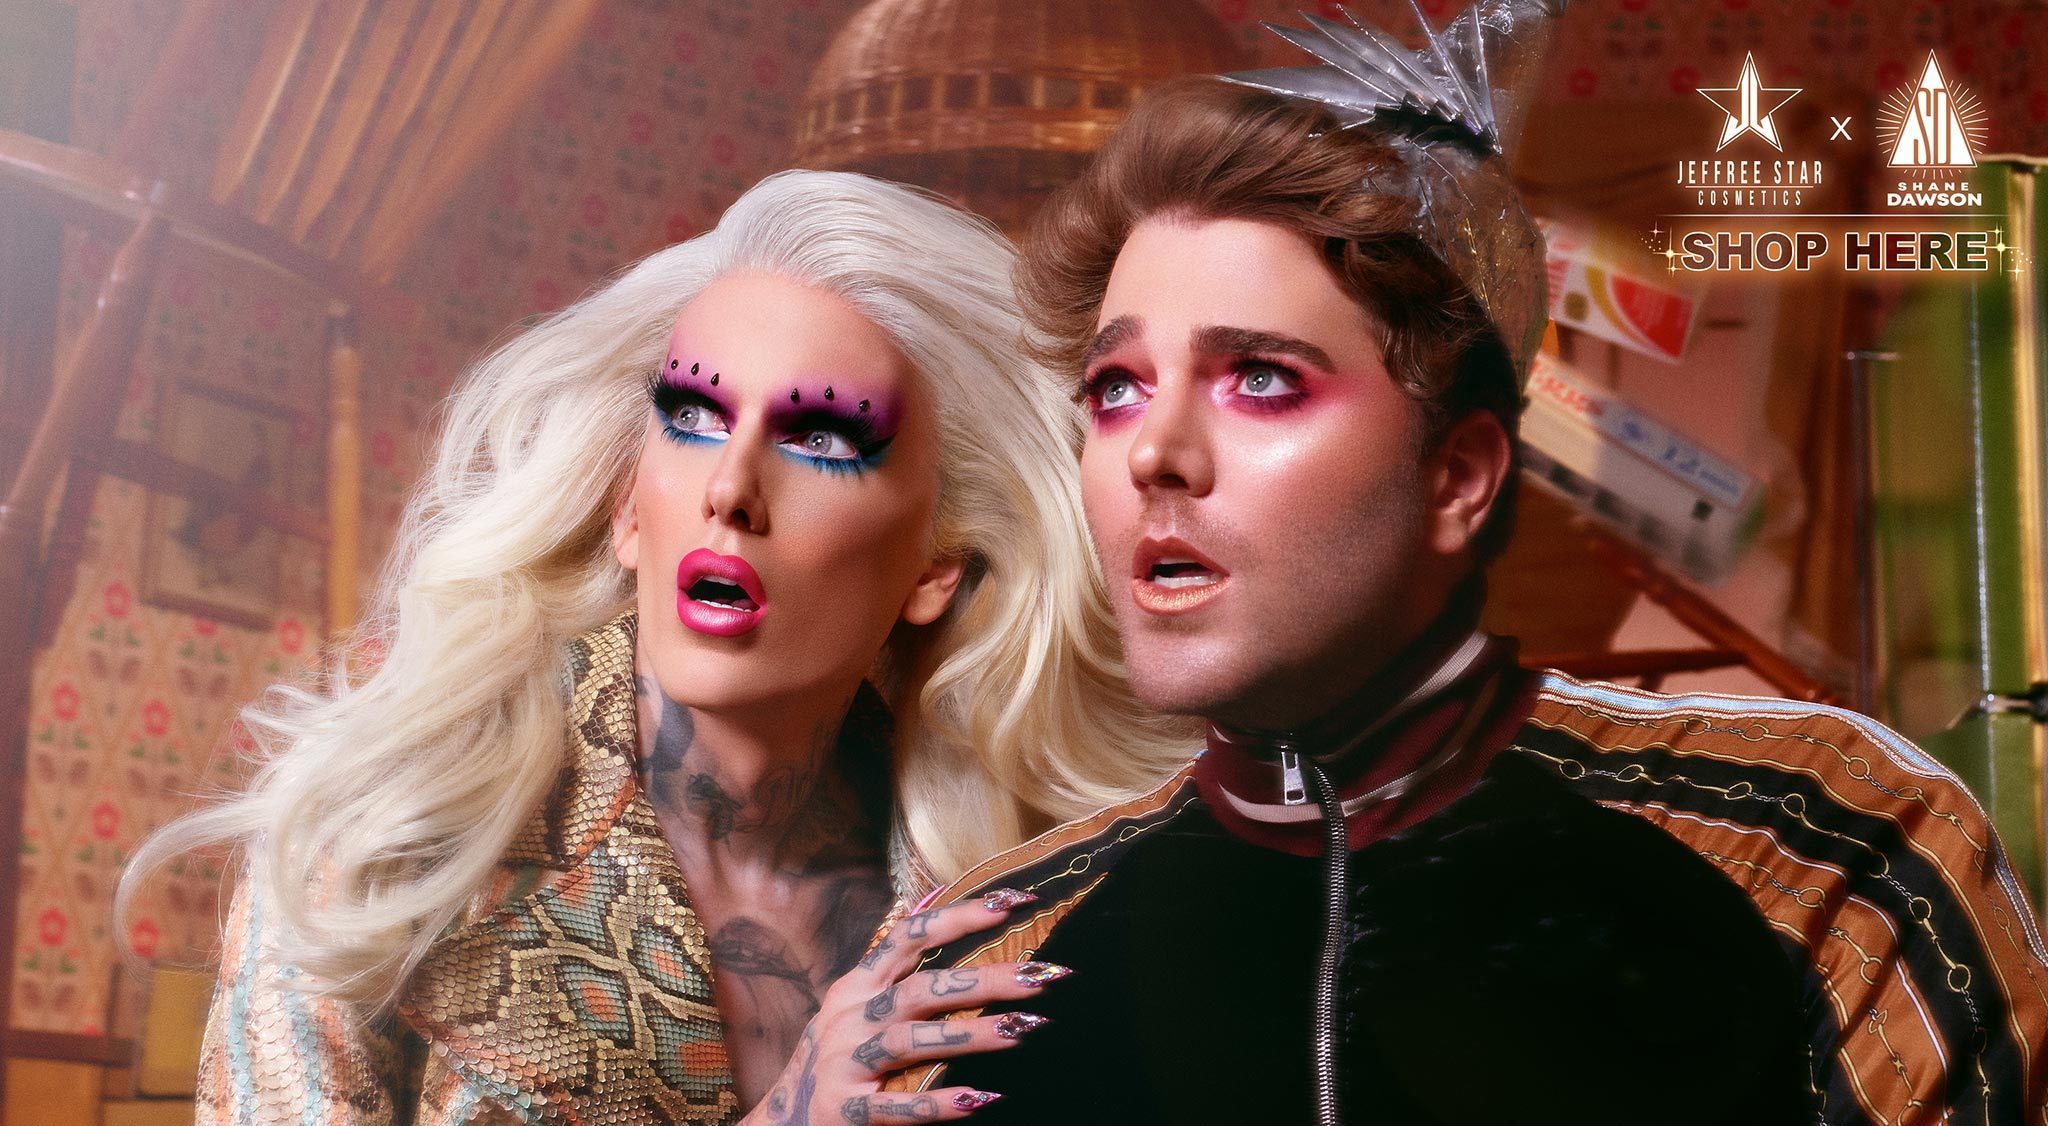 Shane Dawson And Jeffree Star Create A Hit Youtube Series And Amazing Makeup Products The